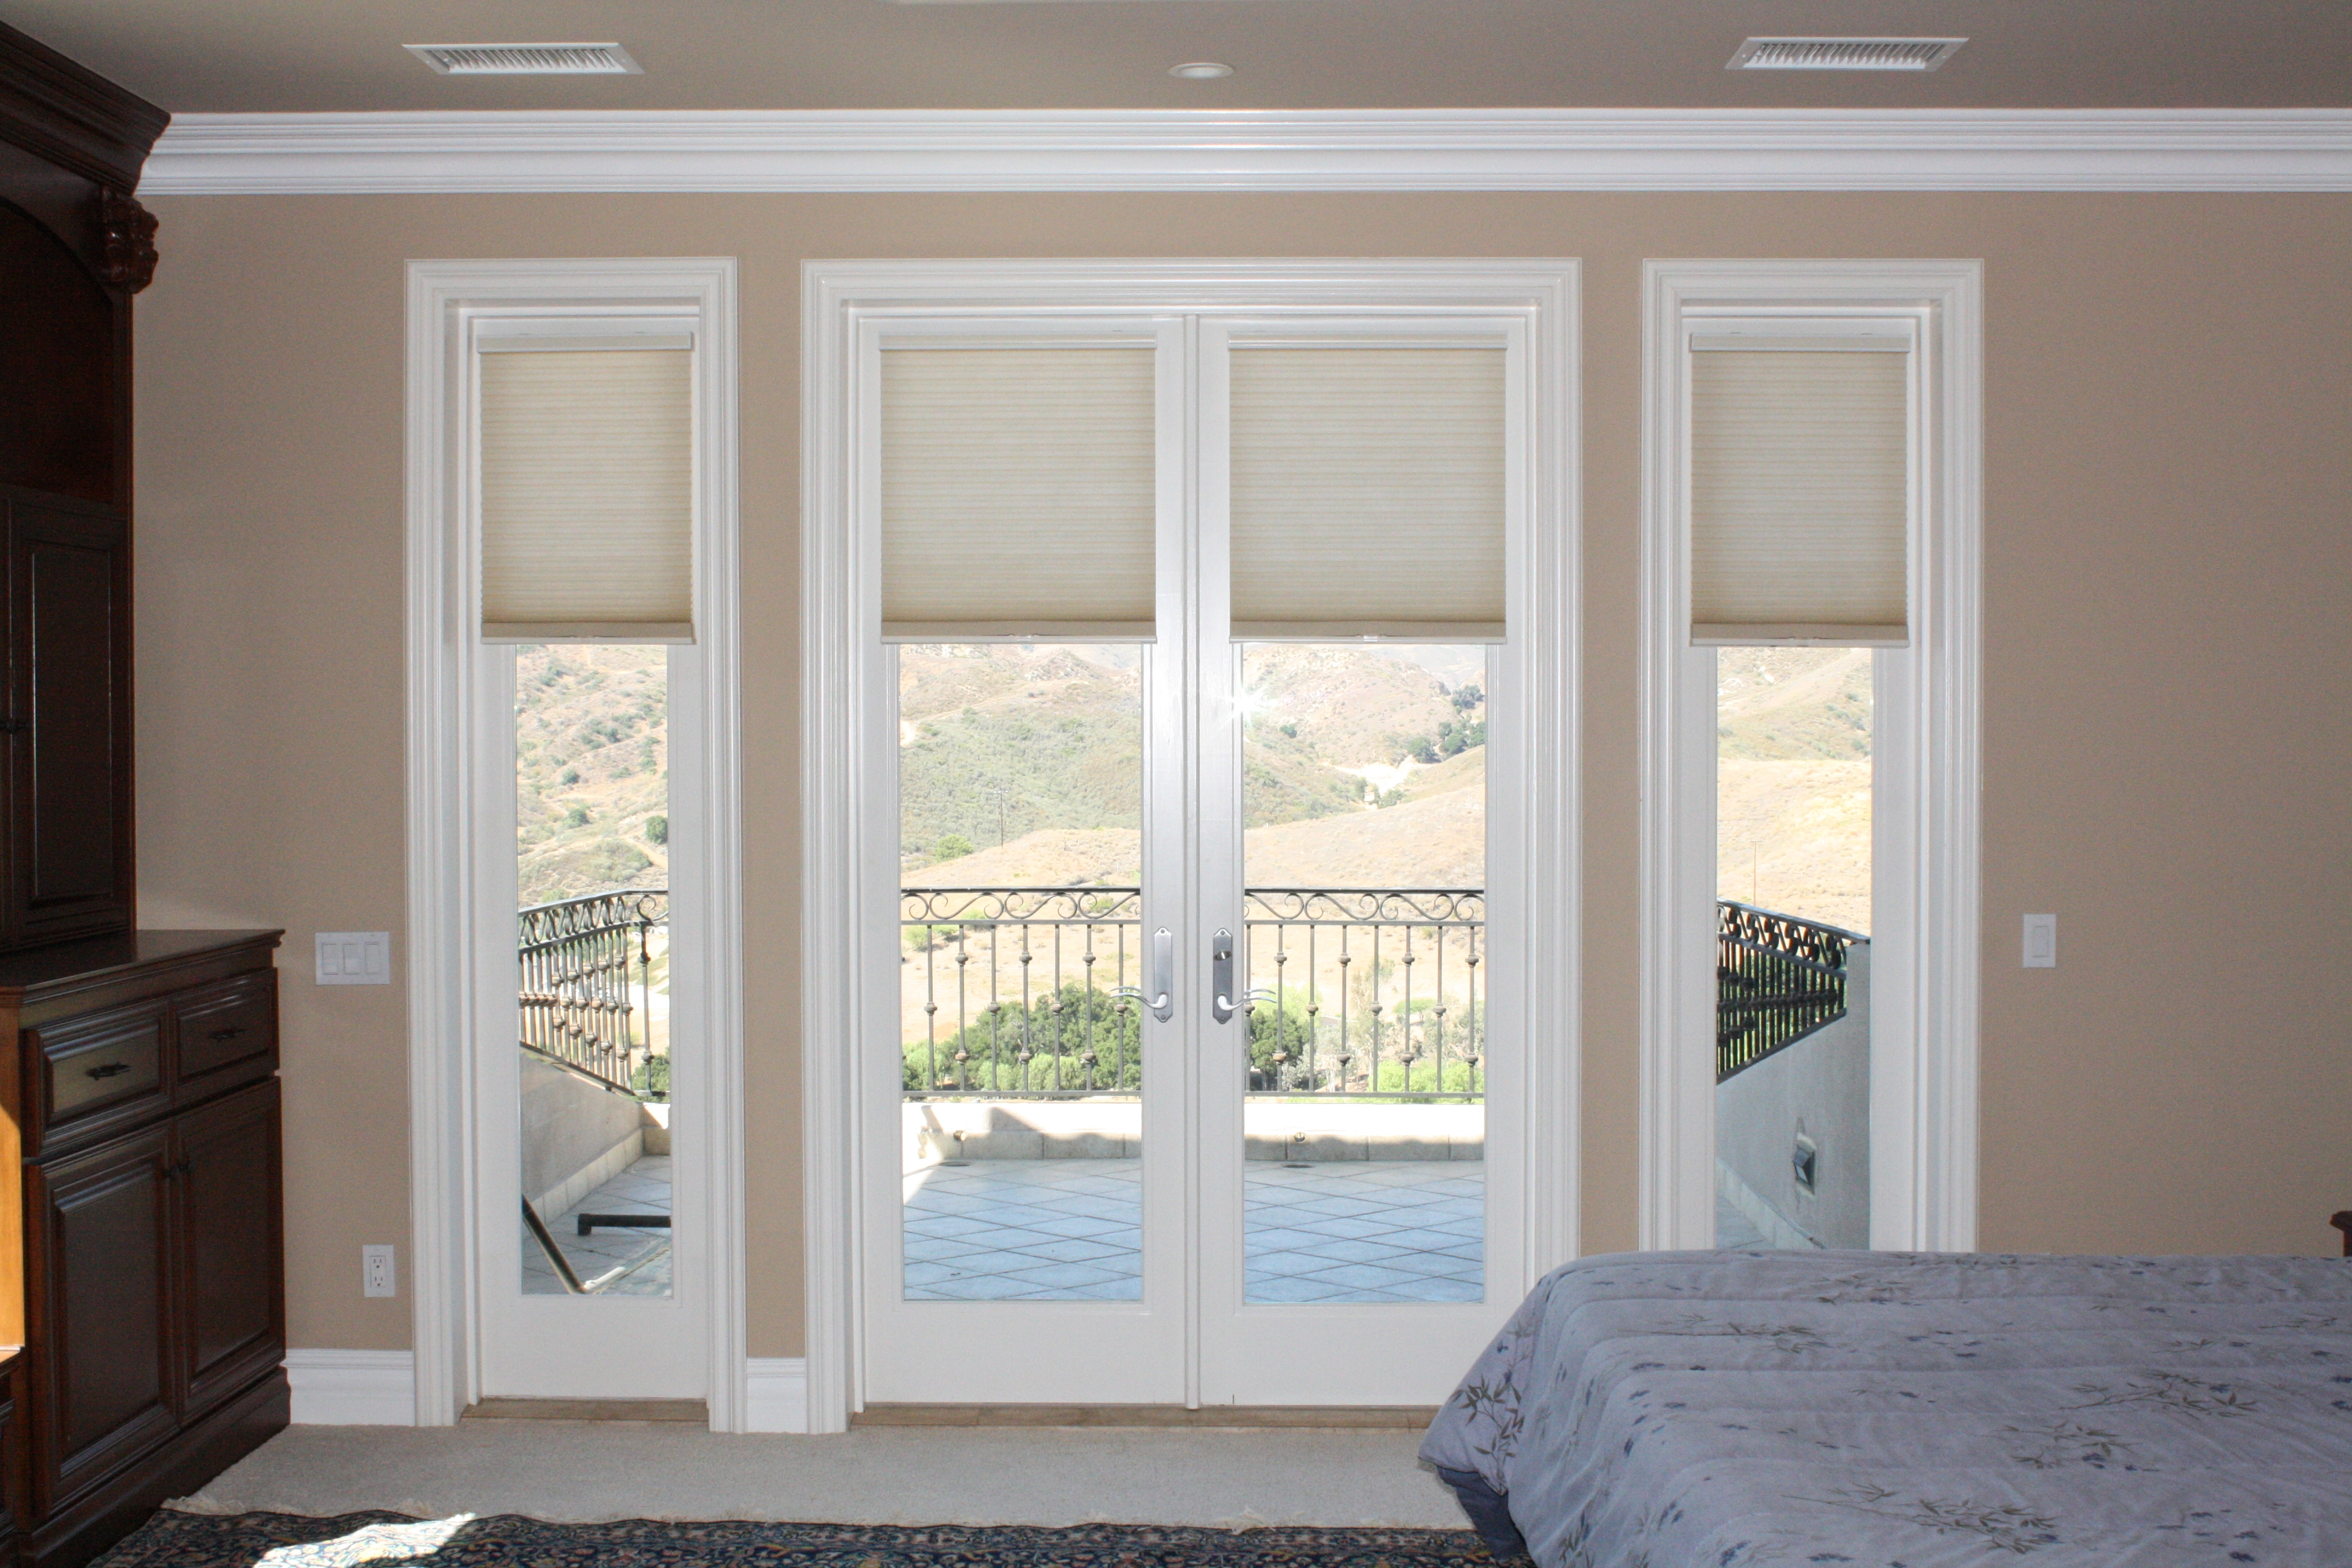 Cellular Shades For Sliding Glass Doors3888 X 2592